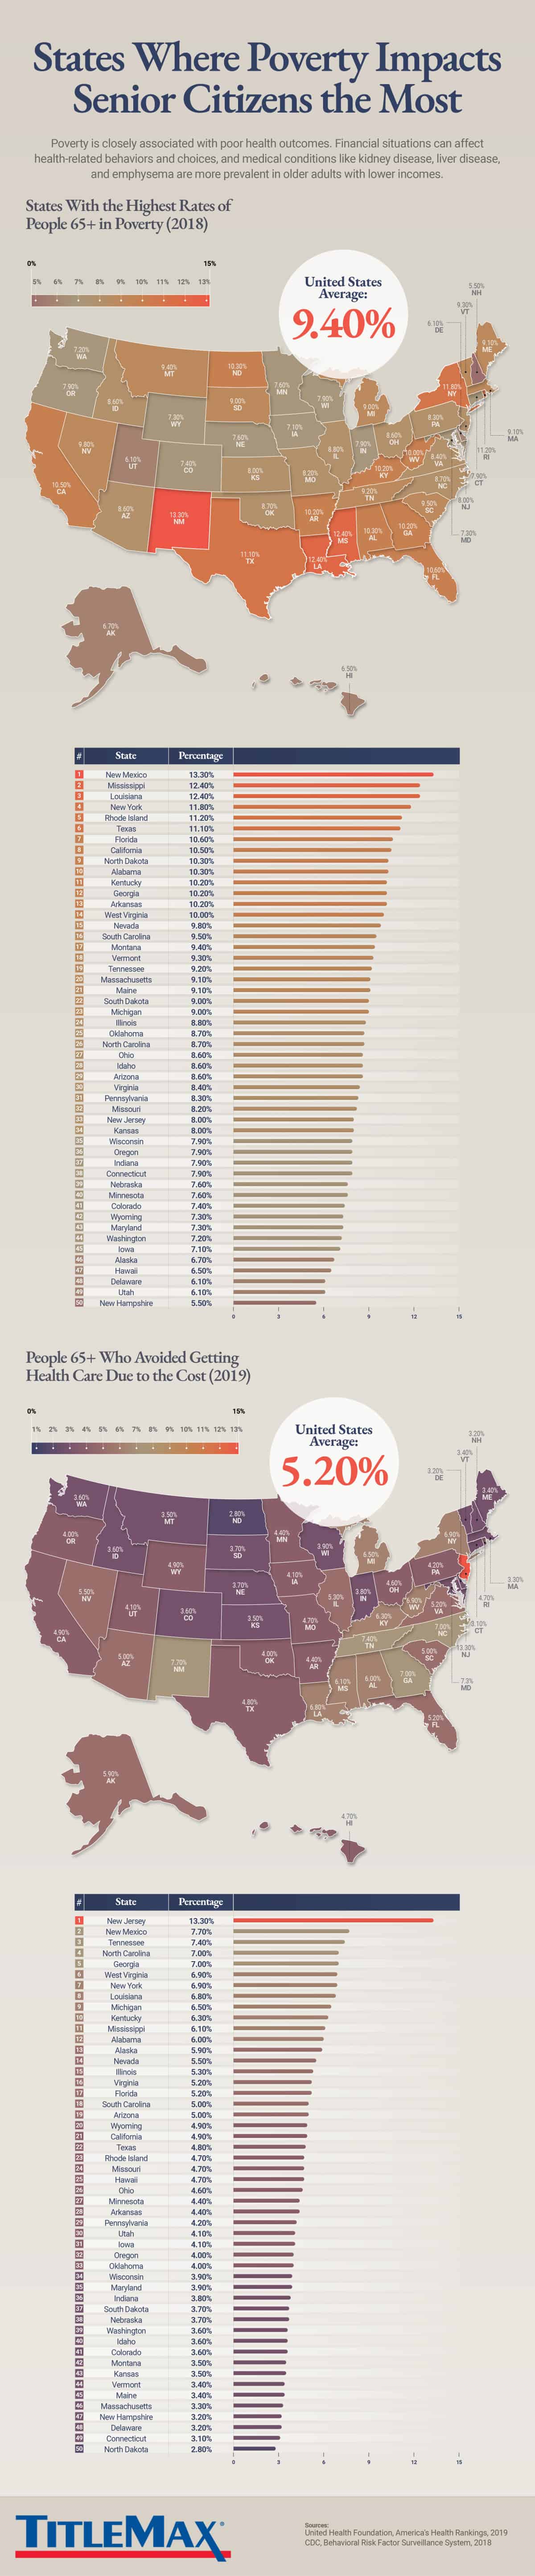 The States Where Poverty Impacts Senior Citizen Health the Most